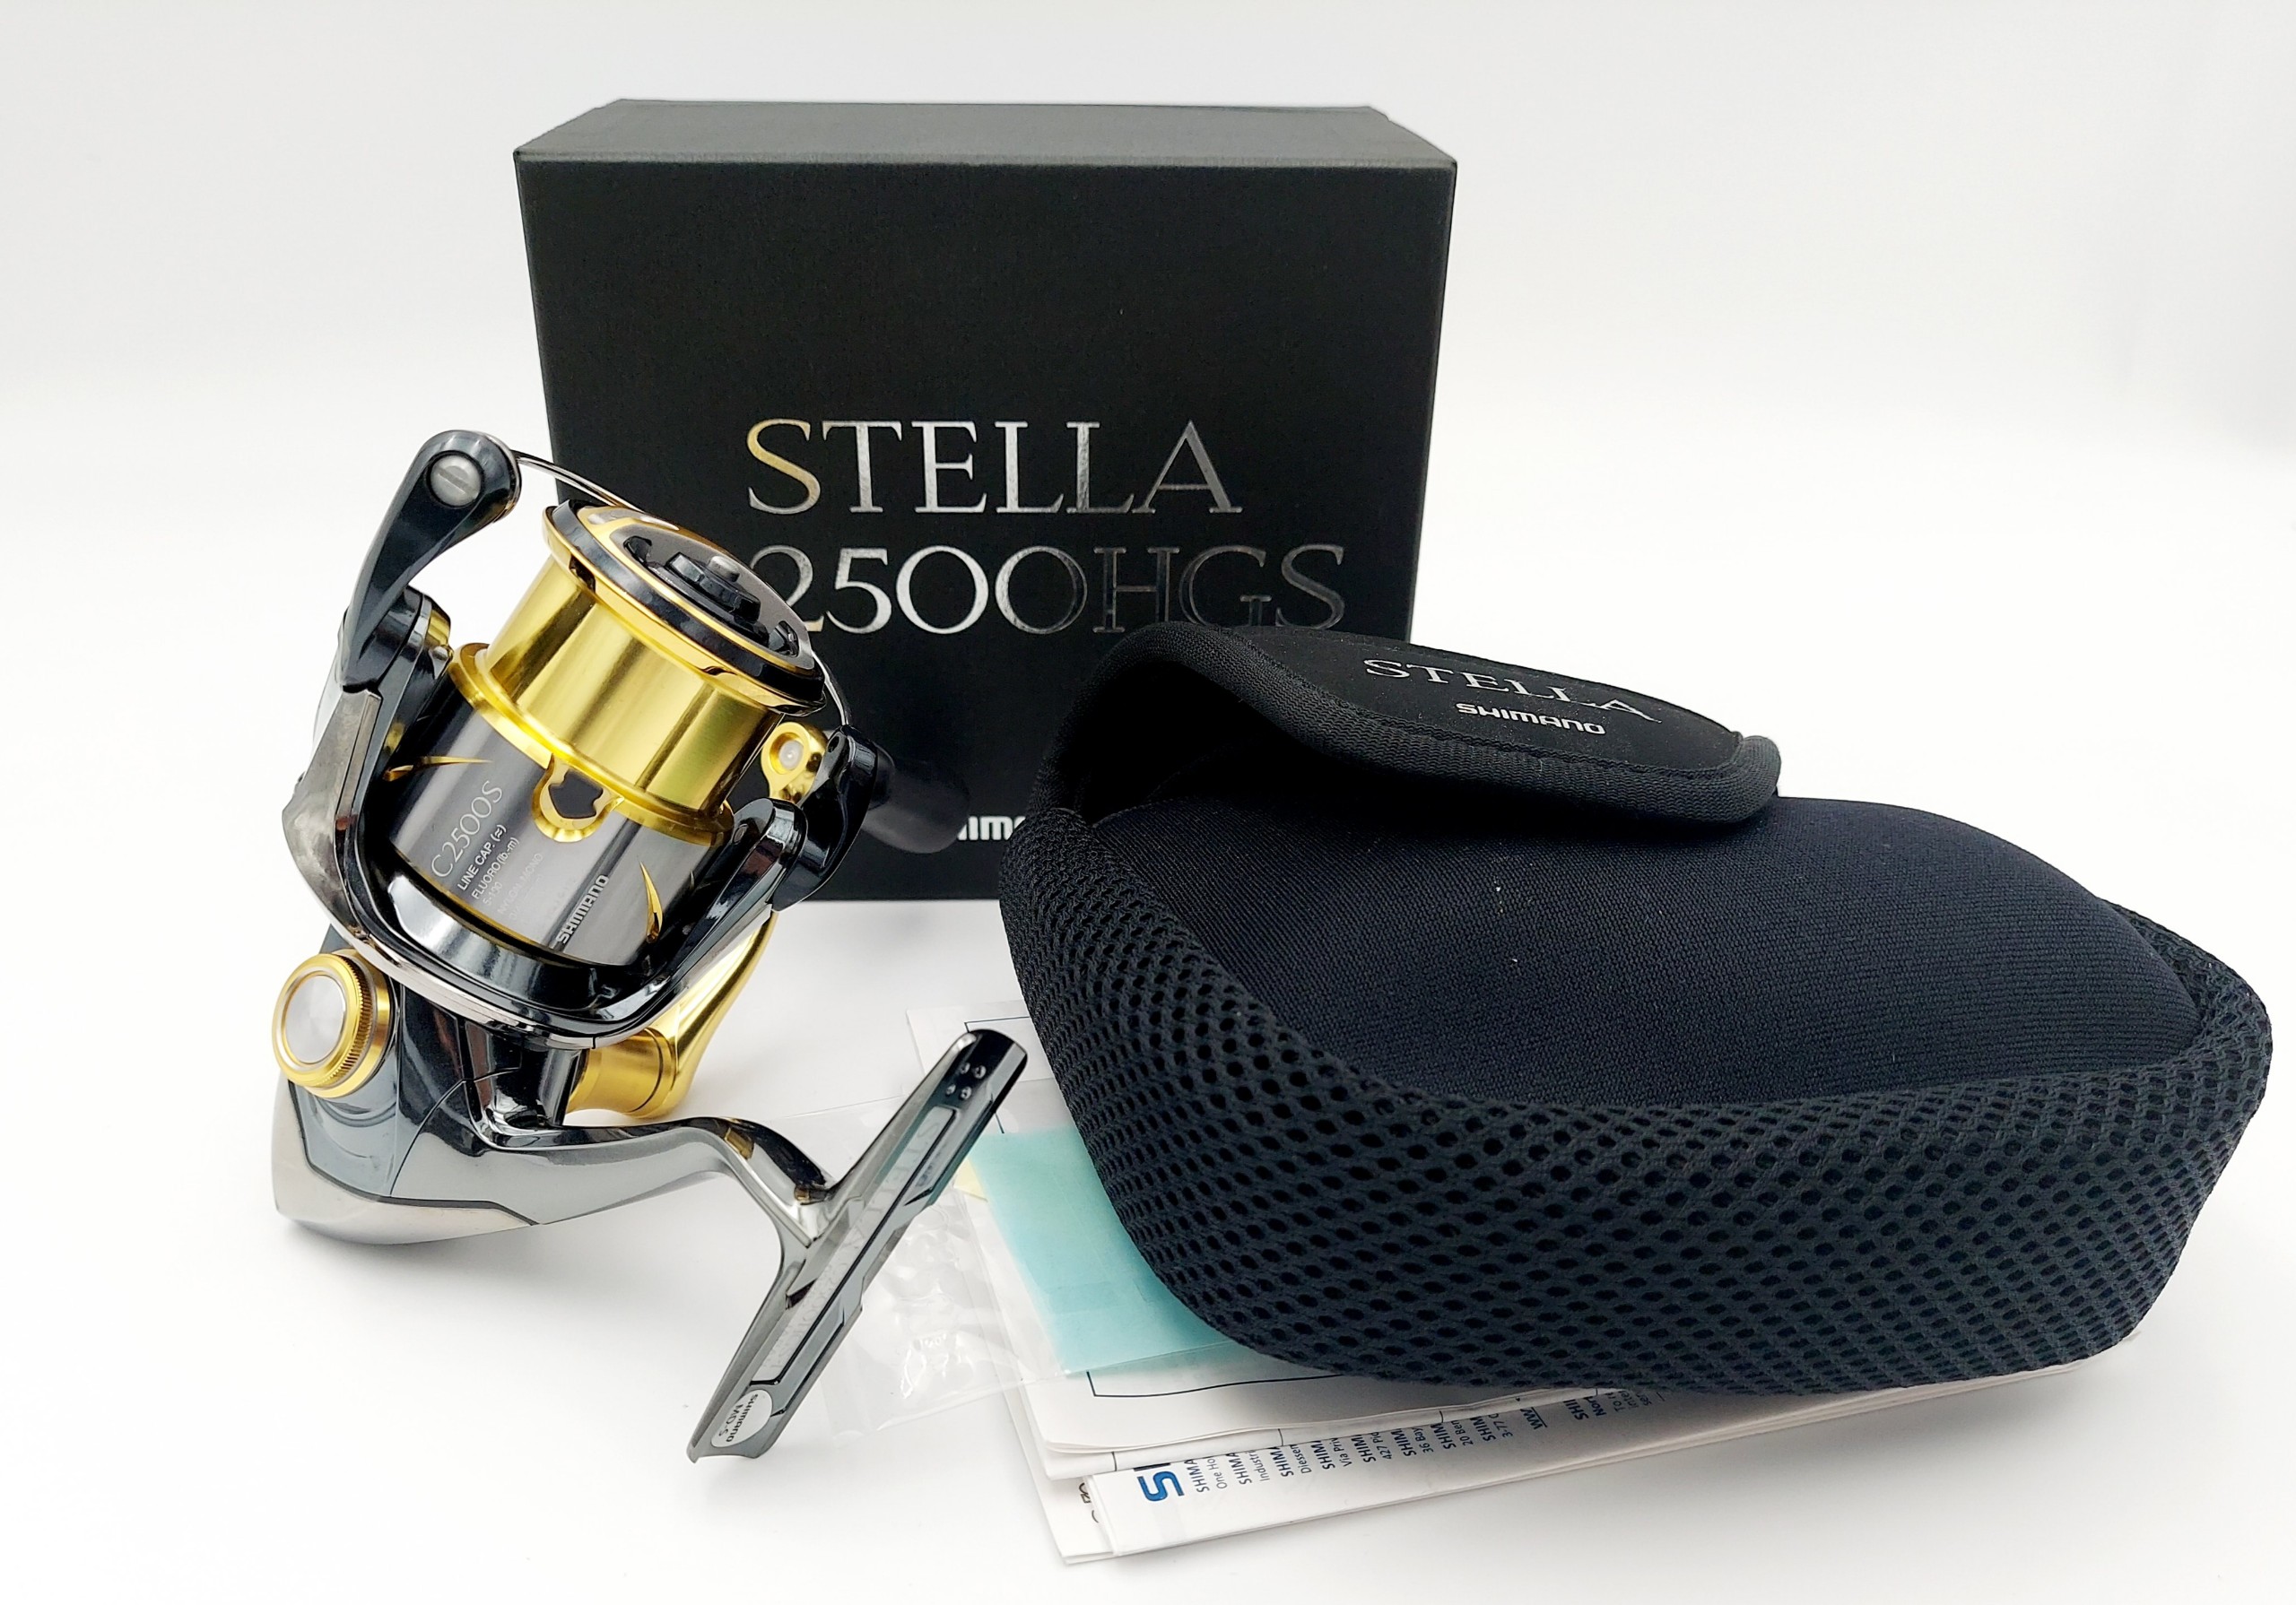 Shimano Stella C2500HGS model 2014 (SOLD OUT) – Tackle Berry Website